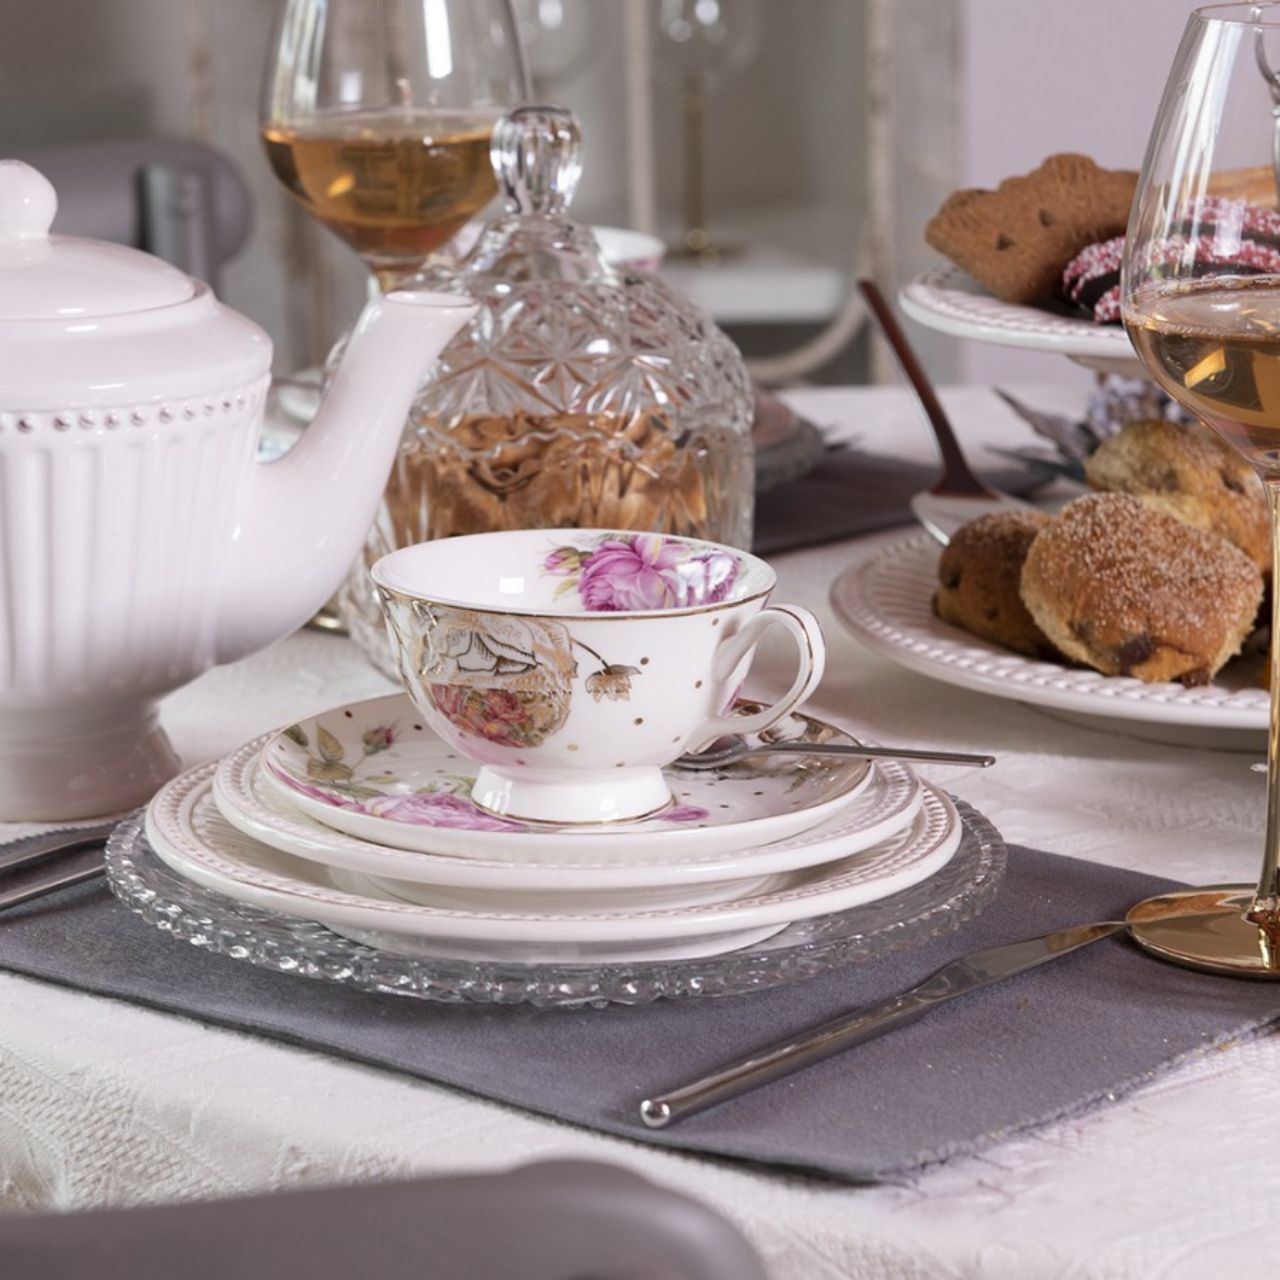 This premium porcelain cup and saucer set features a romantic floral design with pink flowers. Crafted to the highest quality standards, the elegant cup offers a delicate and eye-catching presentation. Enjoy your favourite beverage in style with this romantic cup and saucer set.